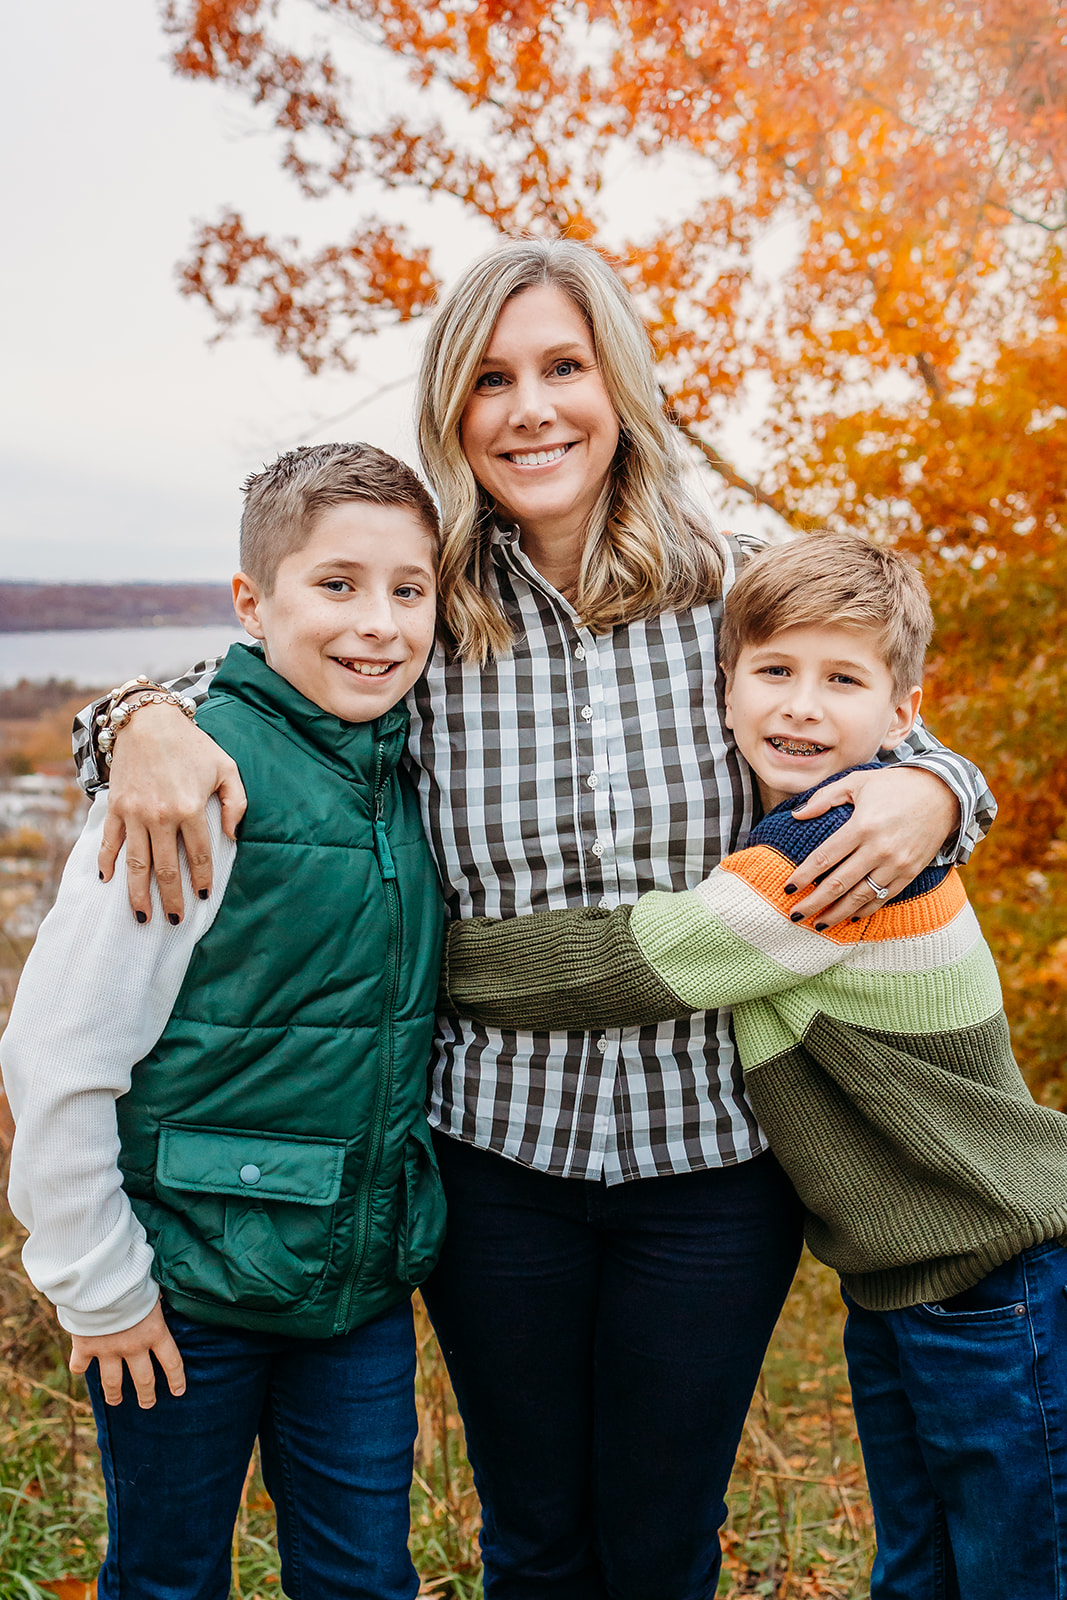 A mother is hugged by her two young sons in a park in fall on a lake before visiting a Toy Store Eau Claire, WI